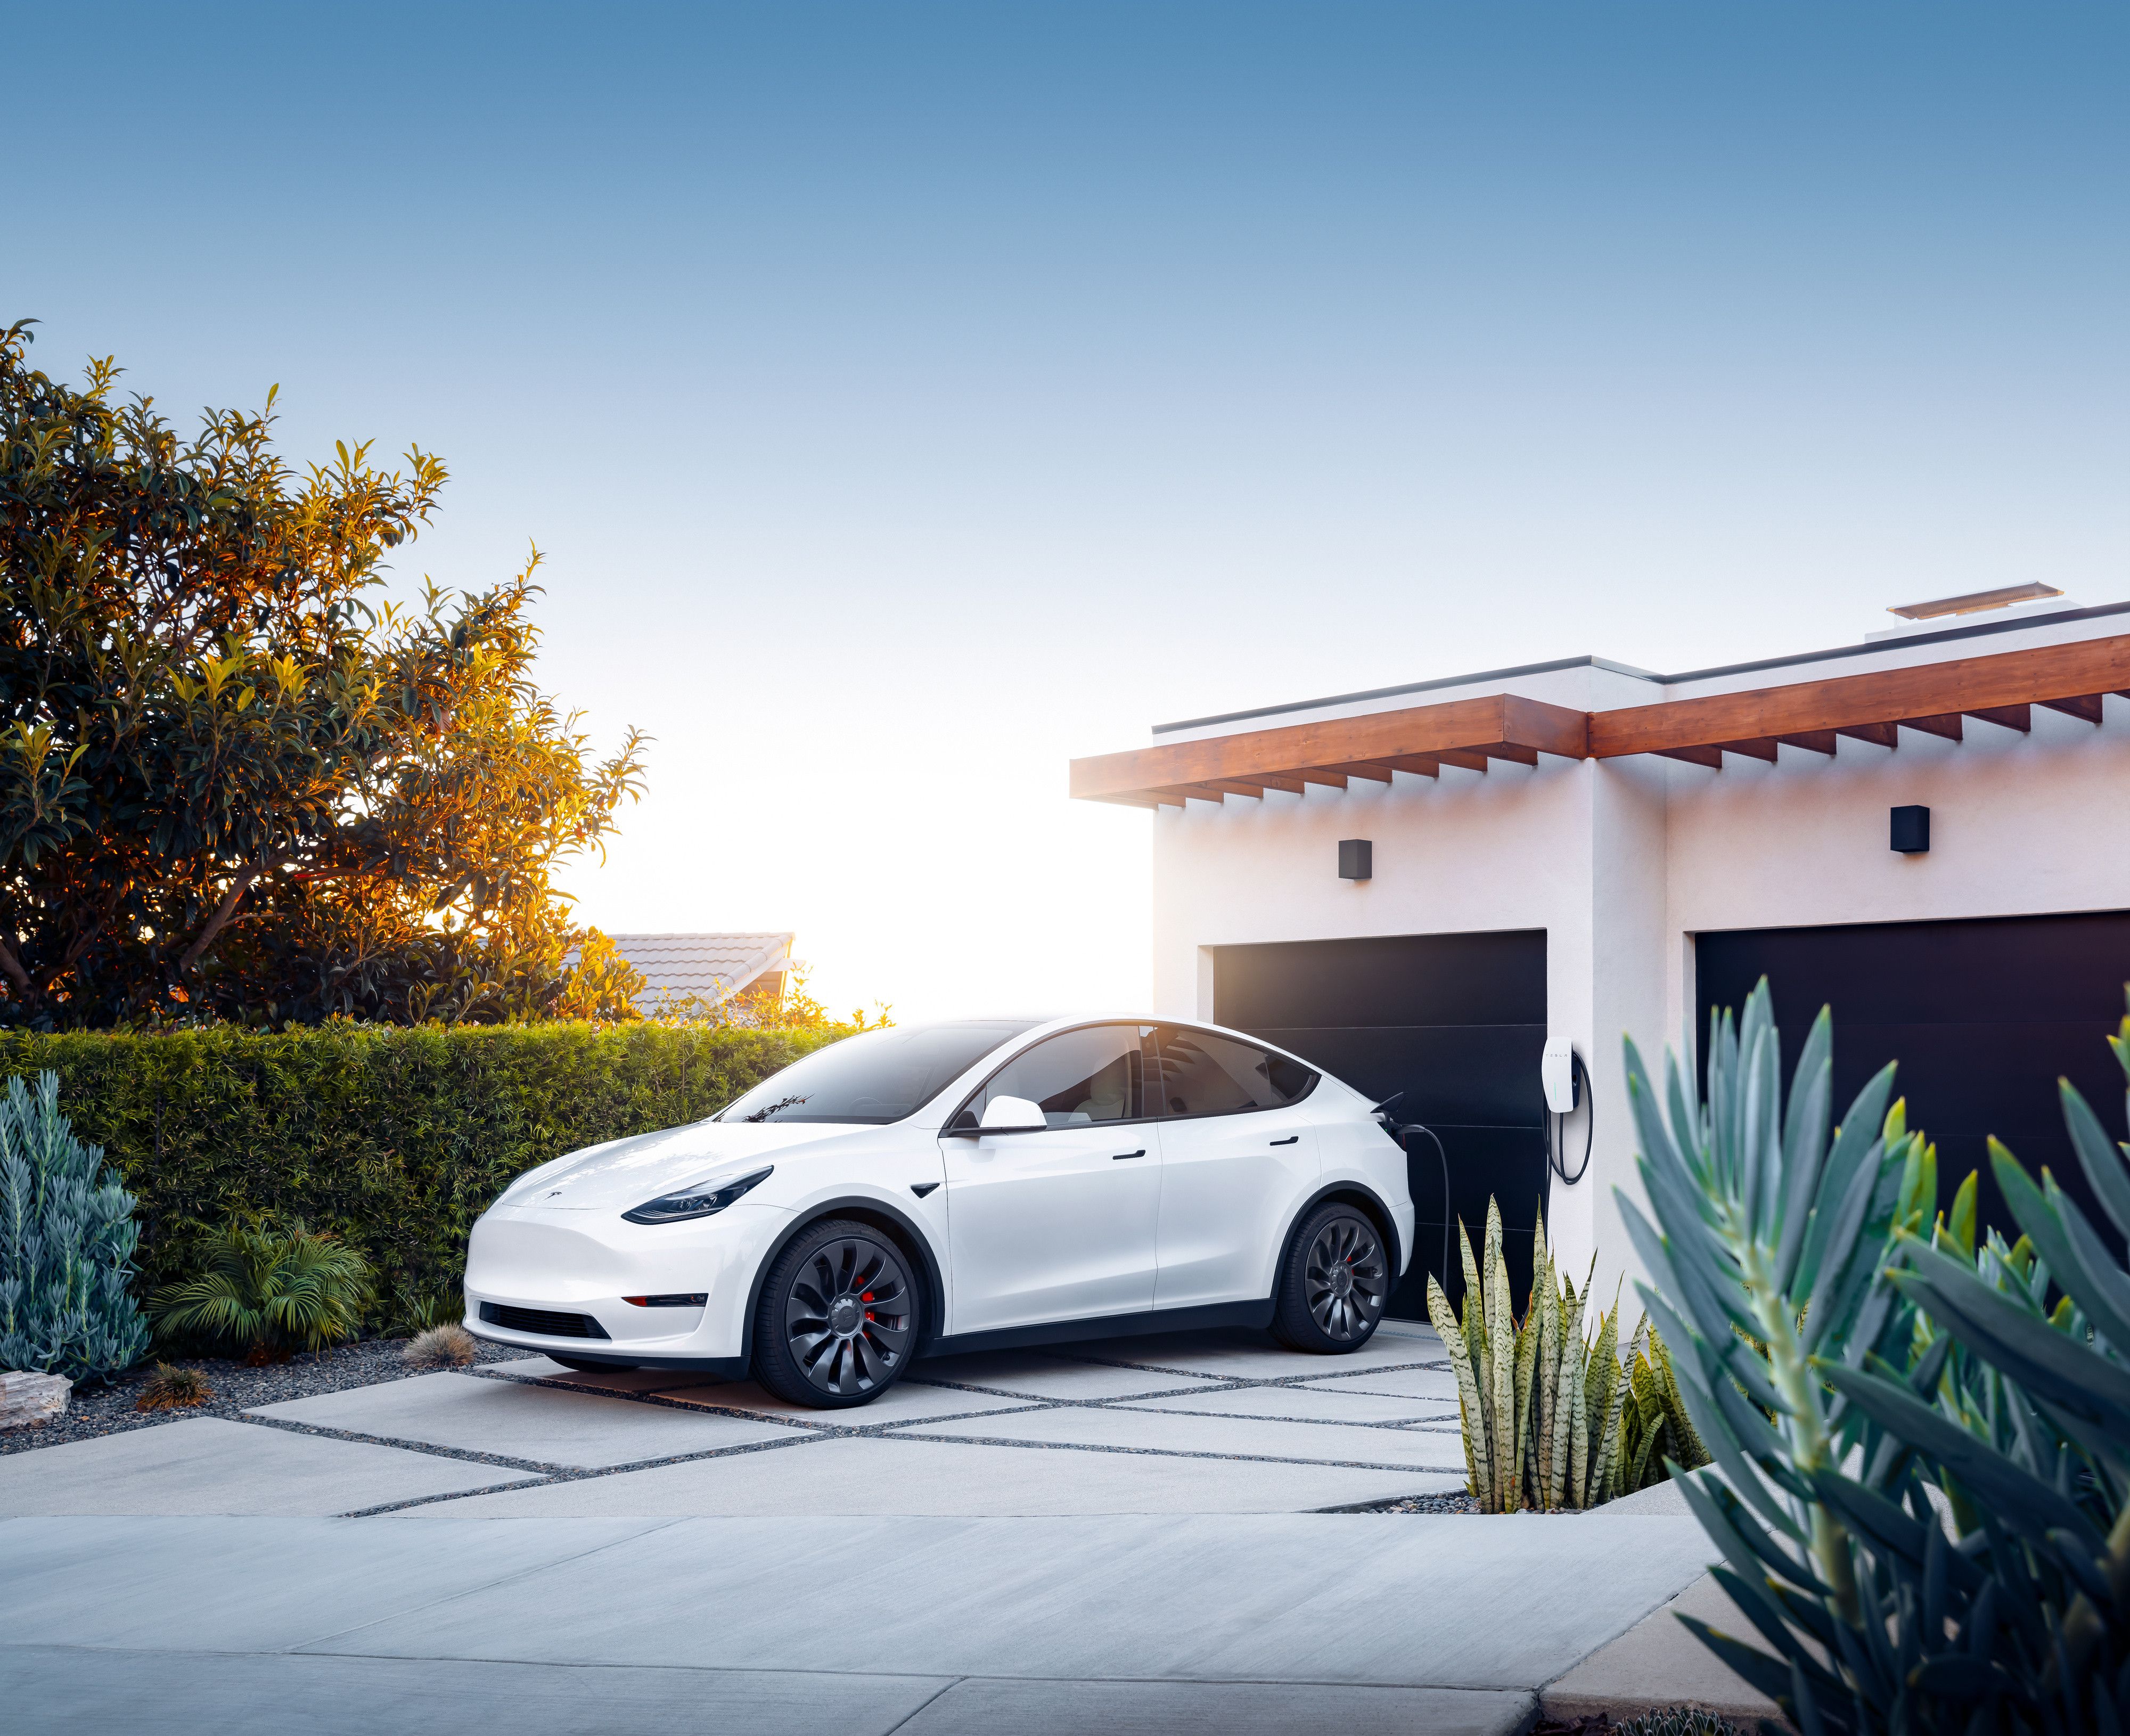 Best CCS Adapters for Tesla - How to charge Teslas on CCS in North